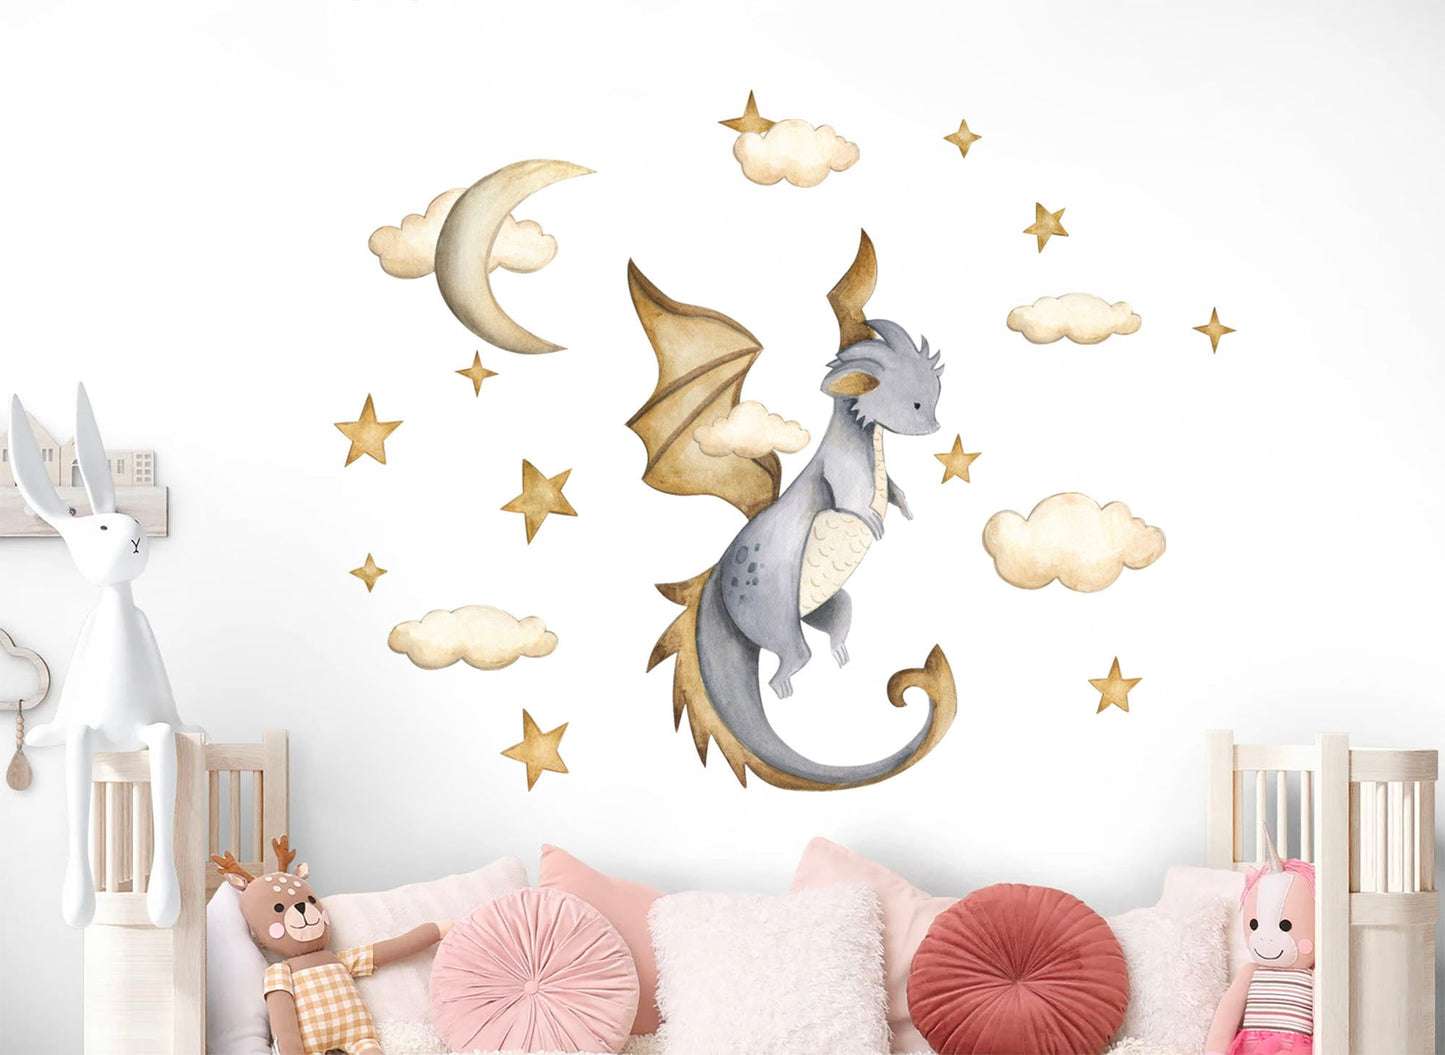 Enchanted Fairytale Dragon Moonlit Sky Wall Decal - Removable Peel And Stick - BR425